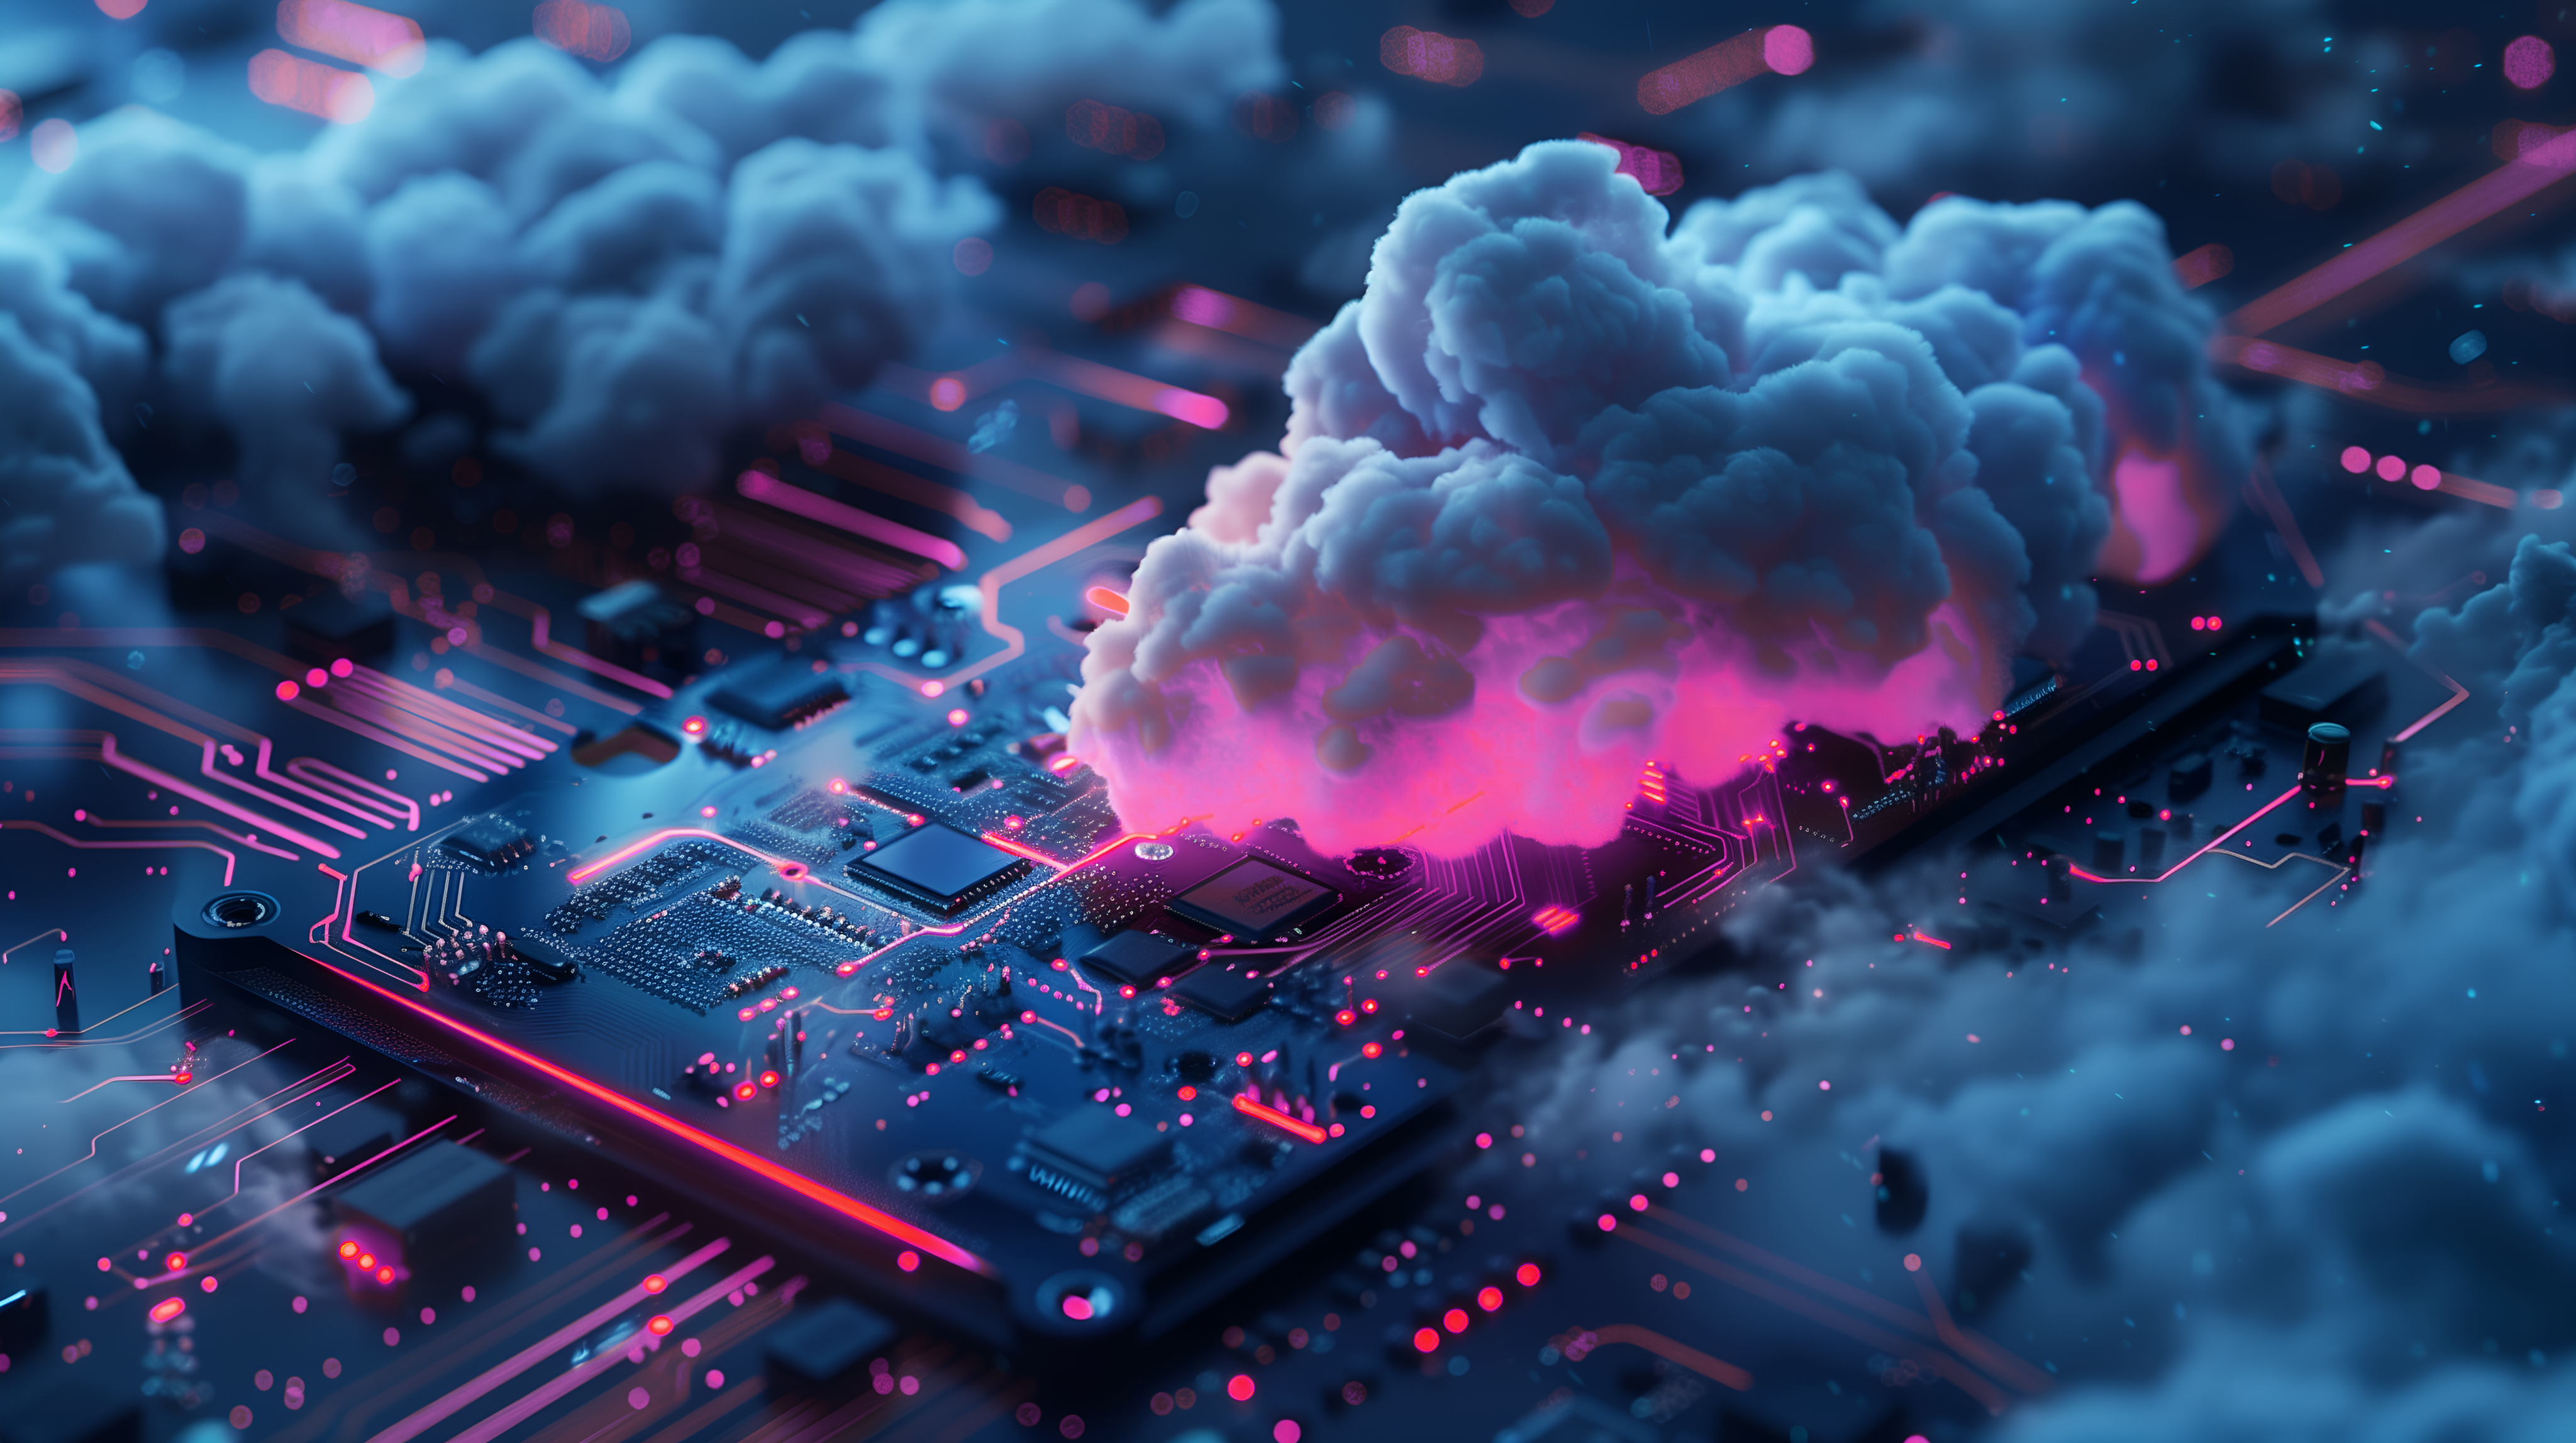 realistic_cloud_on_motherboard_electrical_circuits